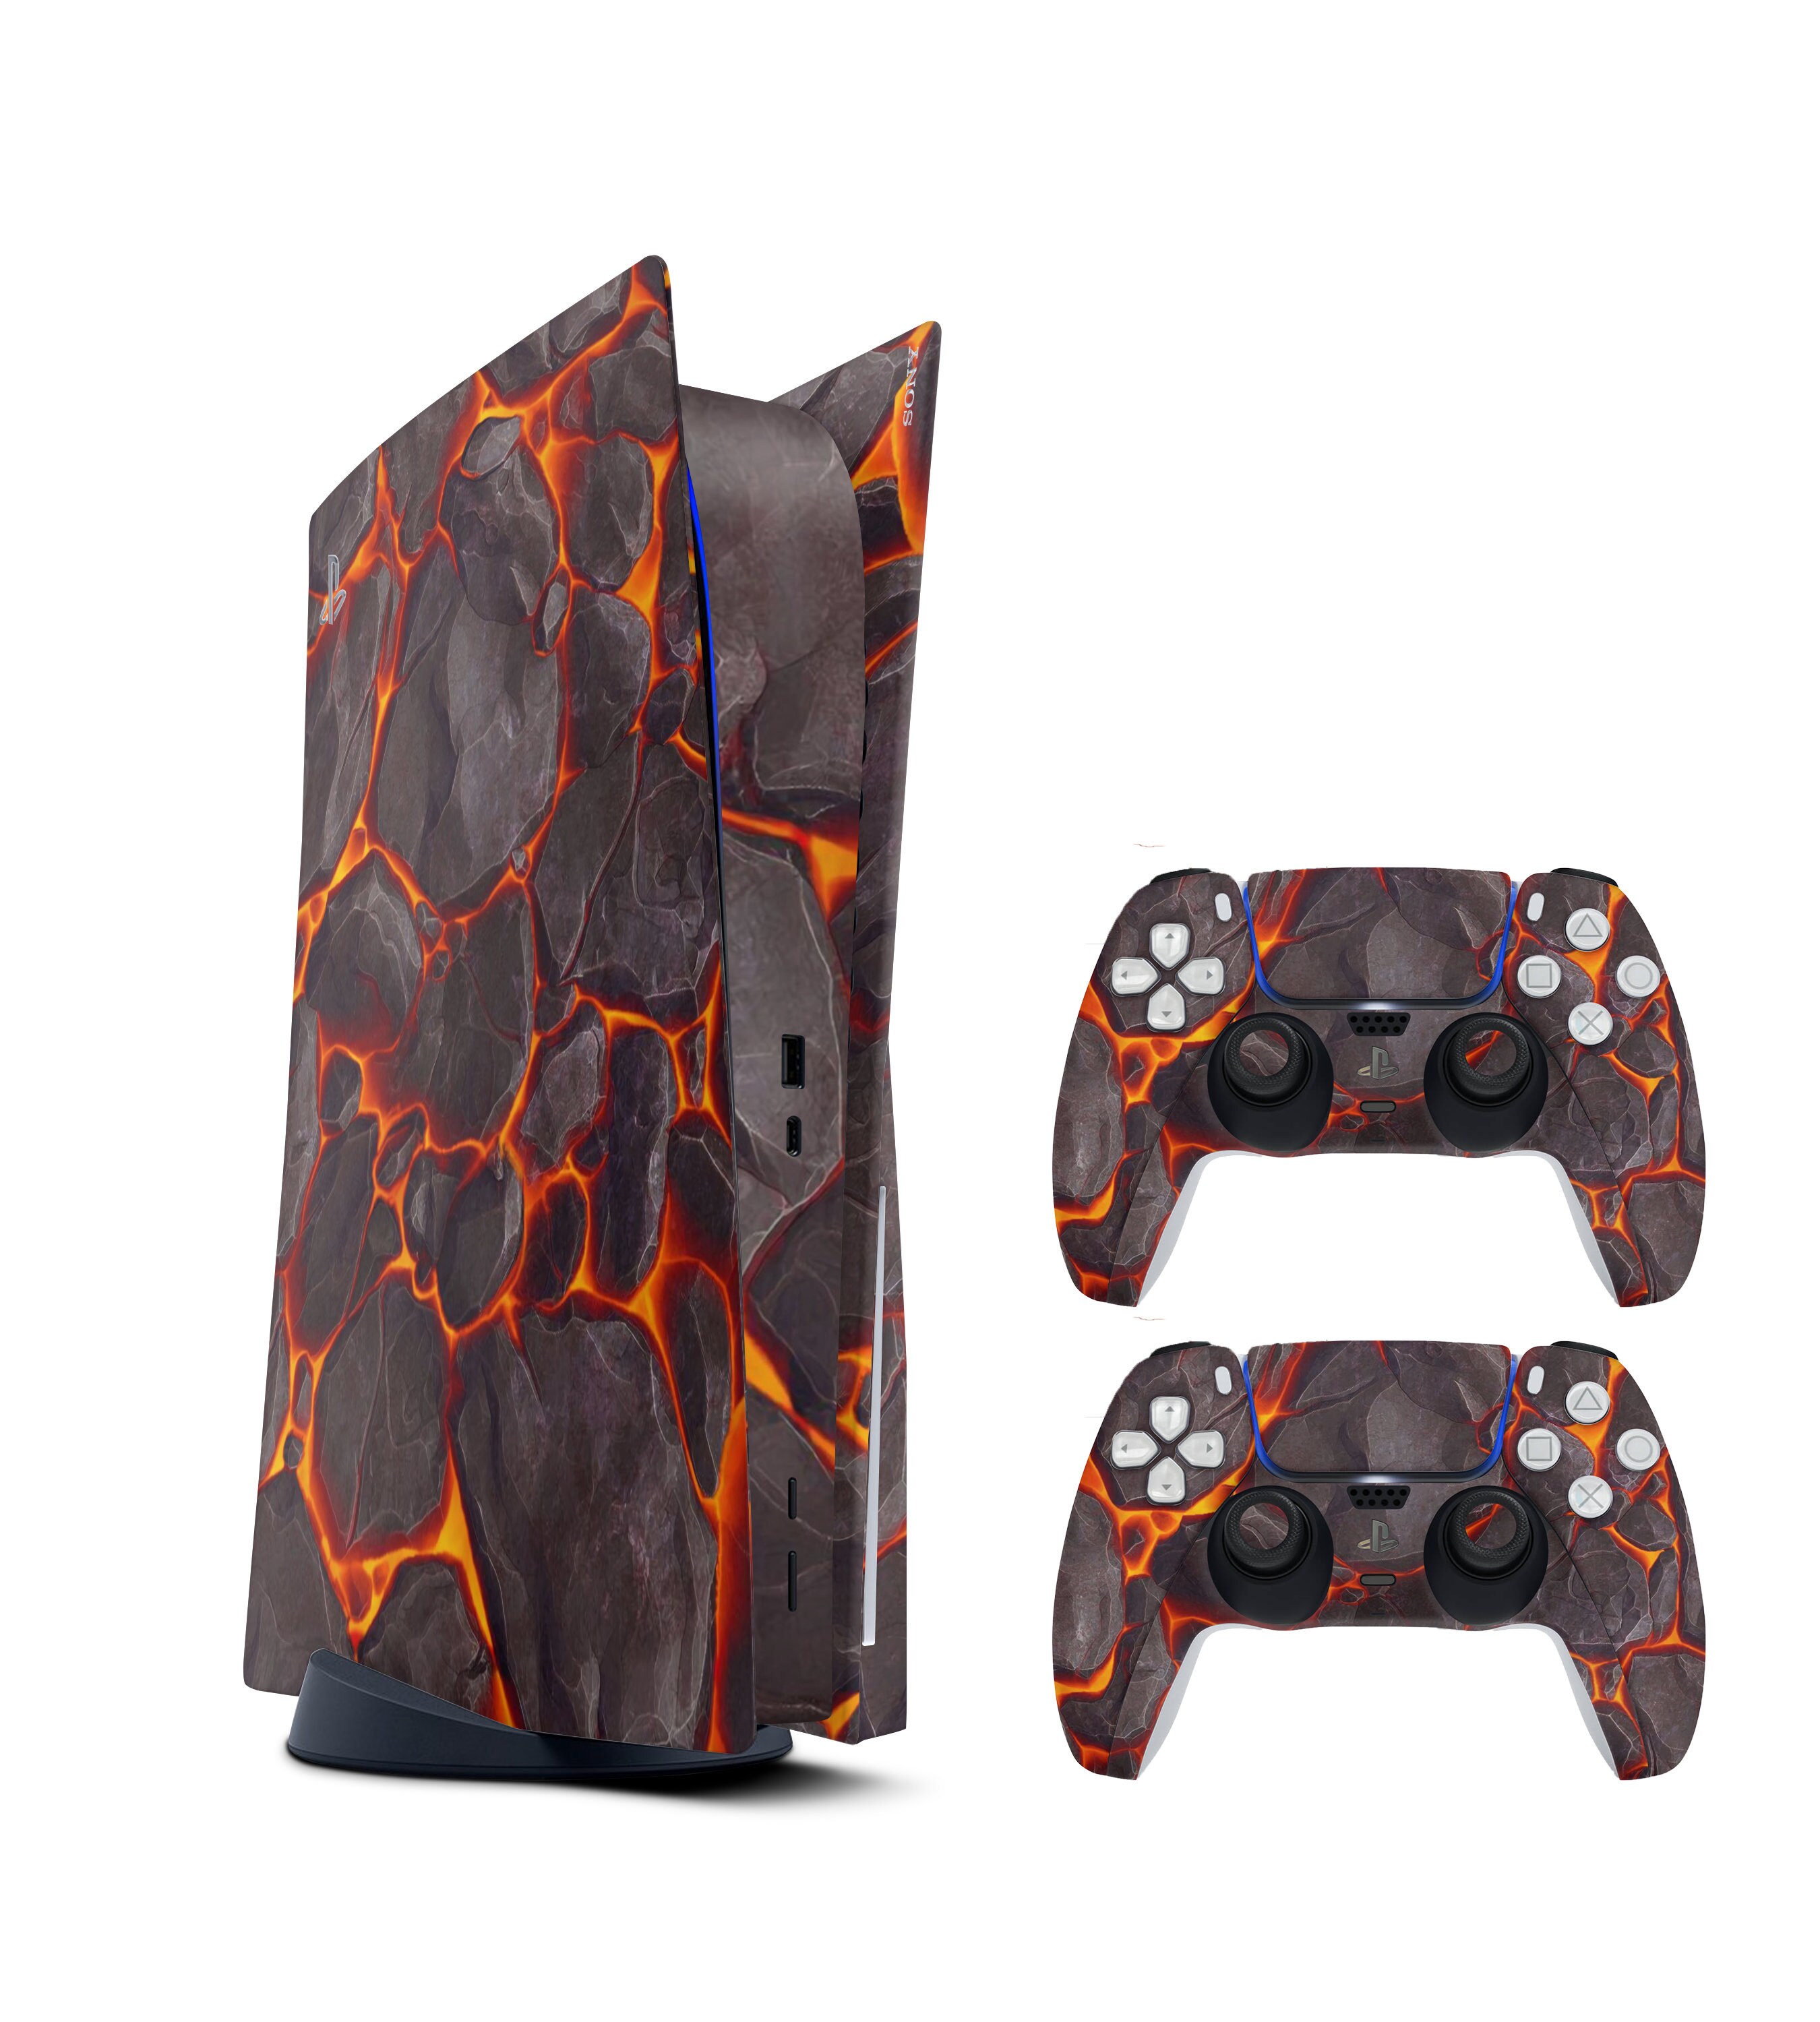 PS5 Skin Volcano skin vinyl decal for Sony Playstation 5 / PS5 | Etsy